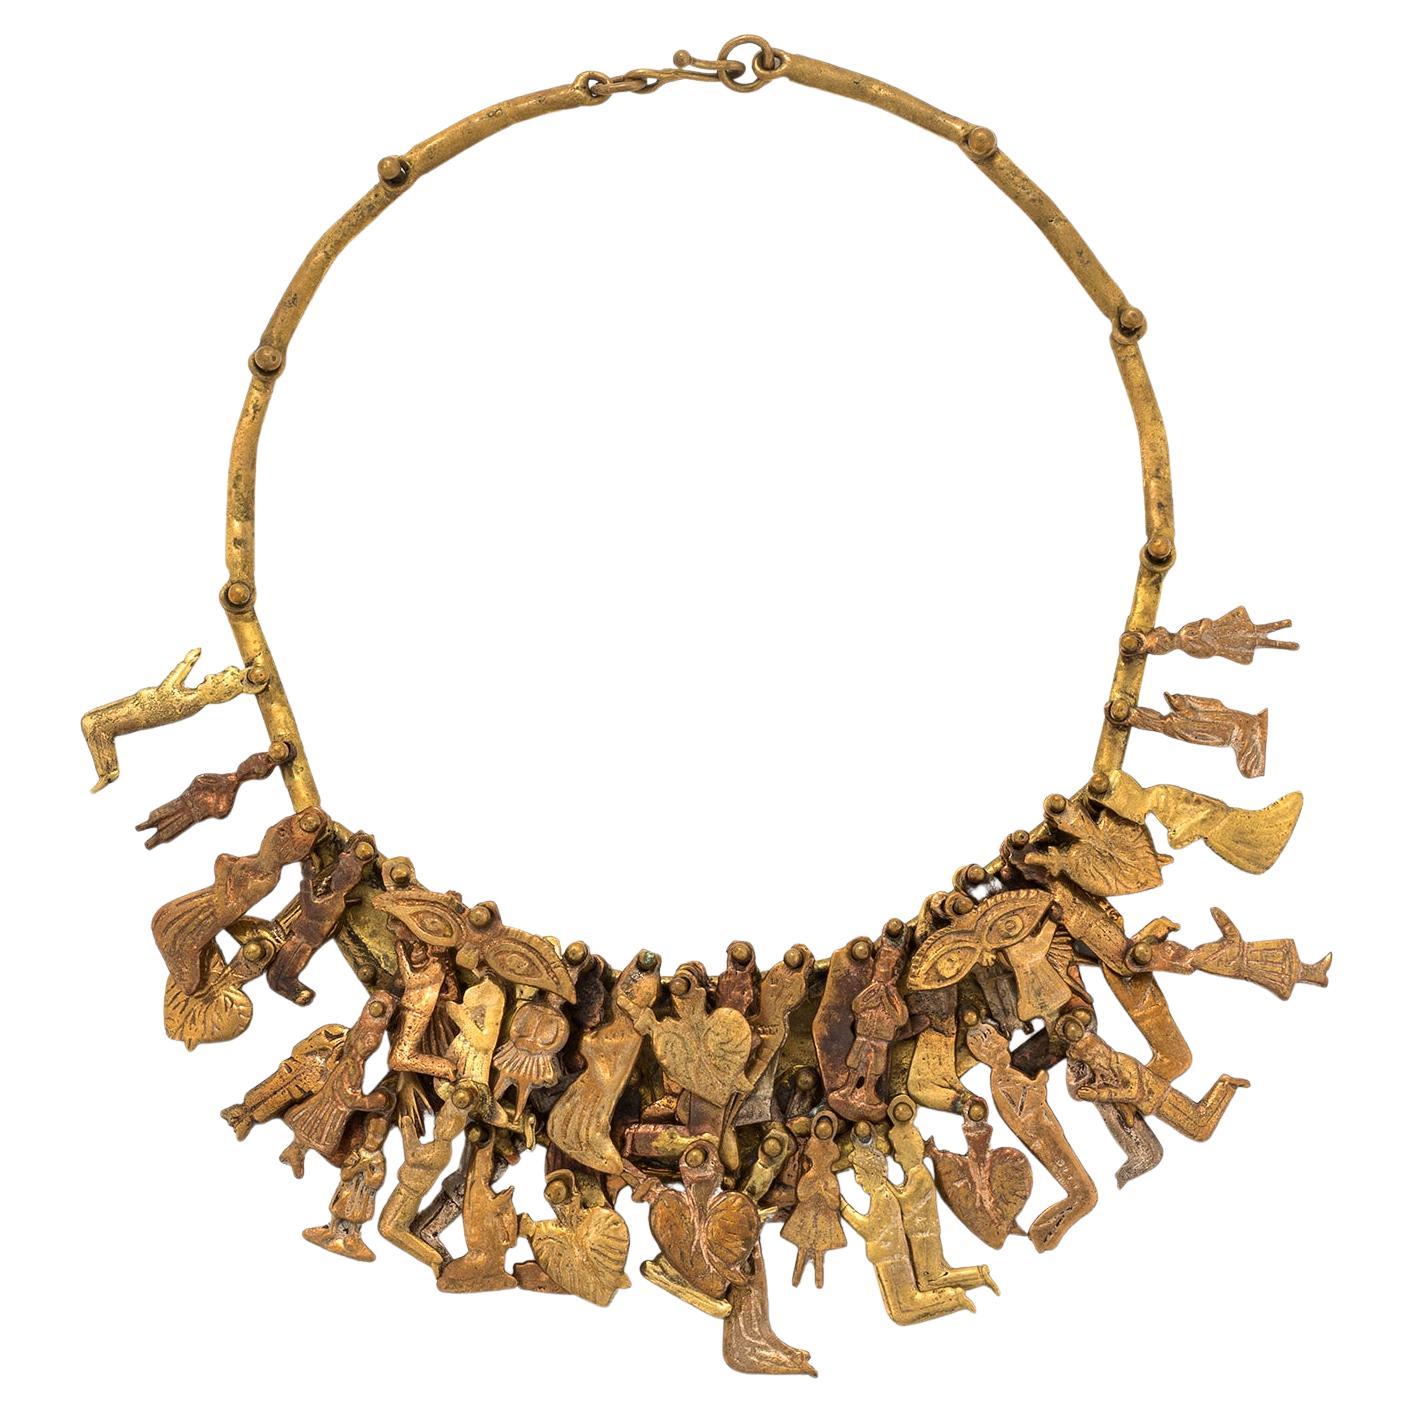 Pal Kepenyes ”Milagros” Necklace with Praying Figures in Brass and Copper For Sale